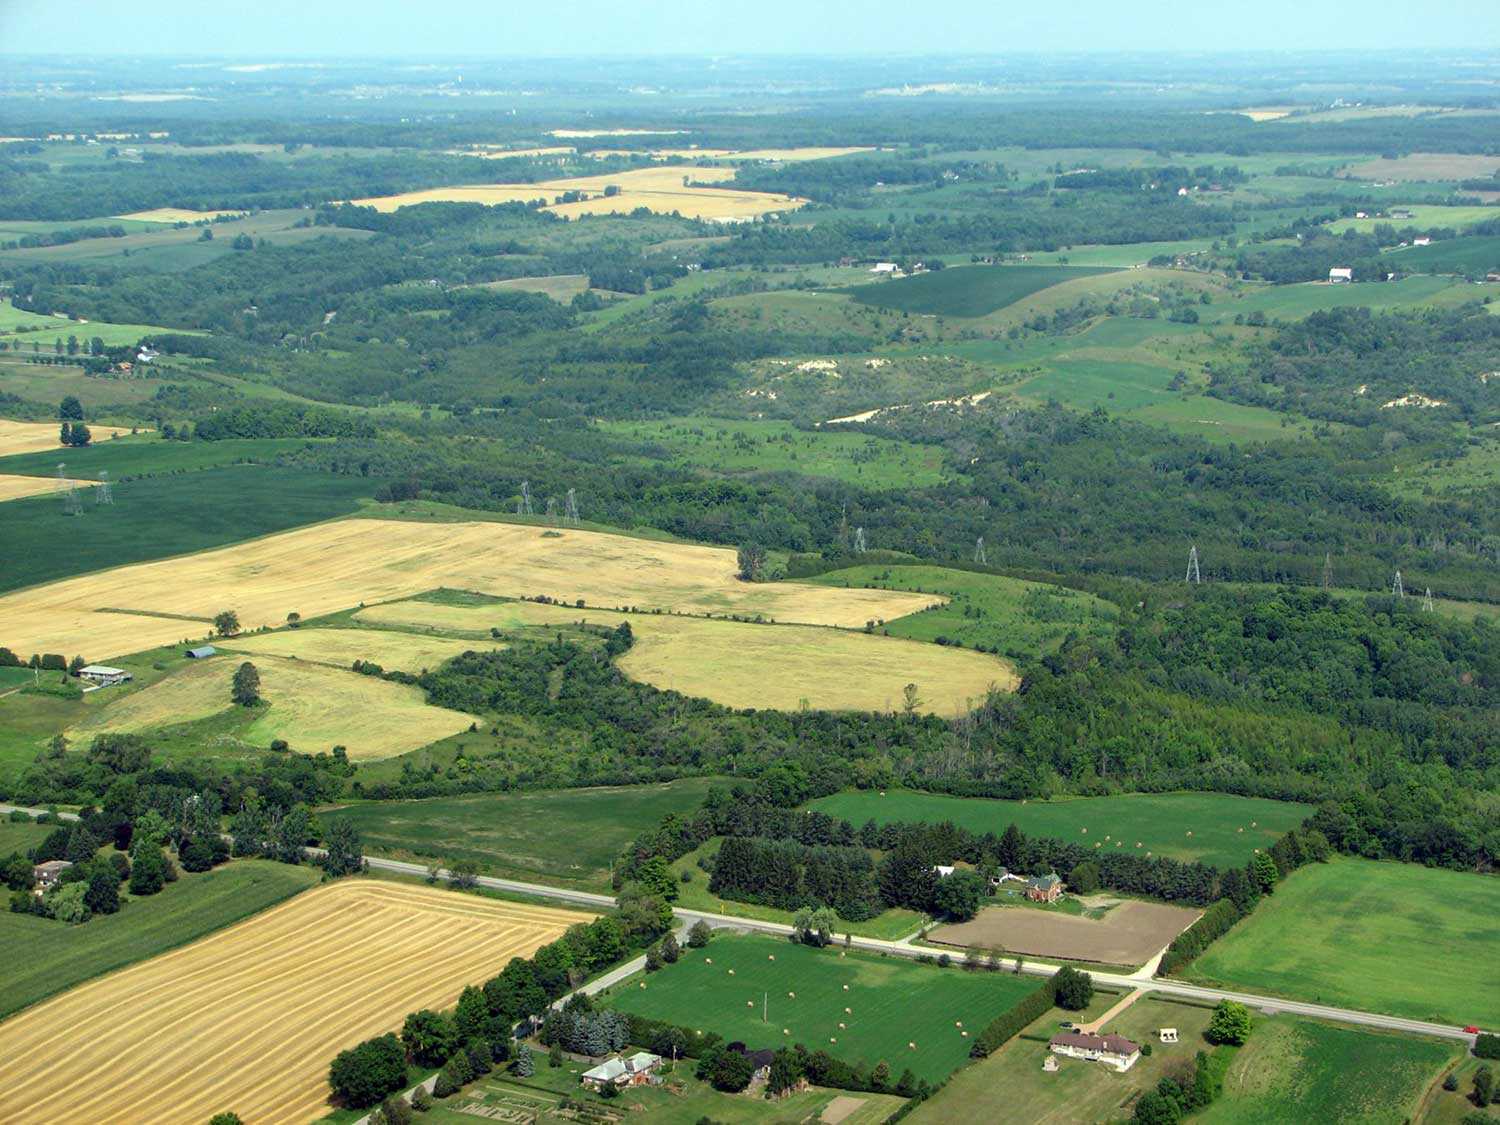 An aerial view of the Enniskillen Valleylands (Photo courtesy of the Central Lake Ontario Conservation Authority)